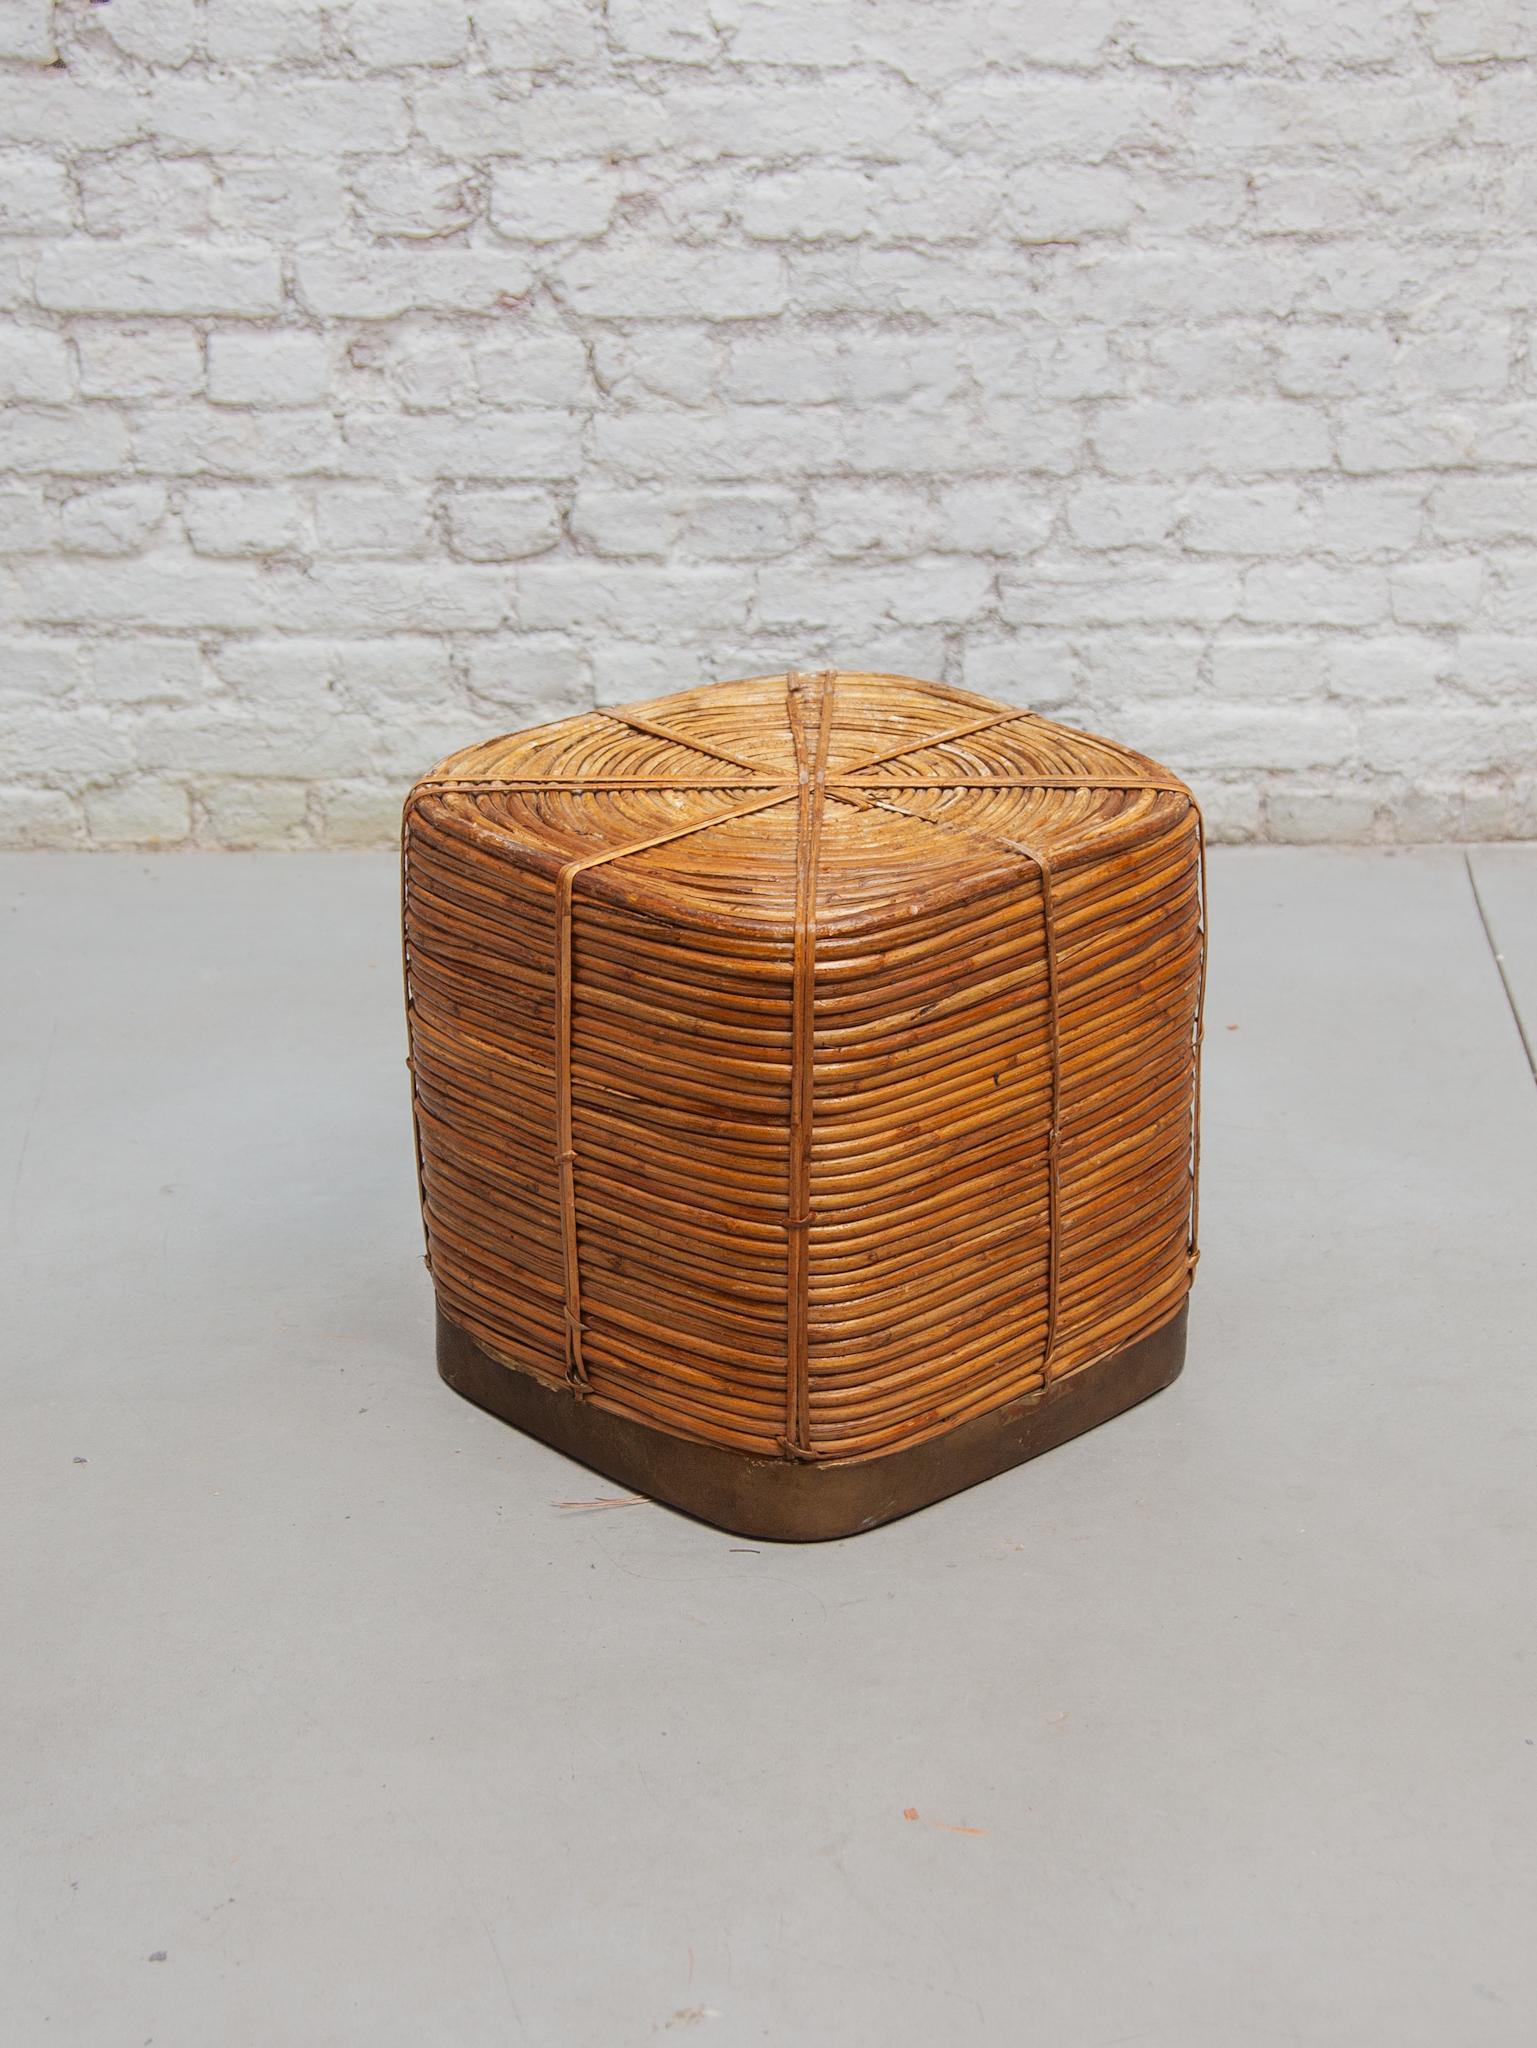 Large Mid-Century Gabriella Crespi Style Brass & Rattan Bamboo Cube Planter For Sale 4